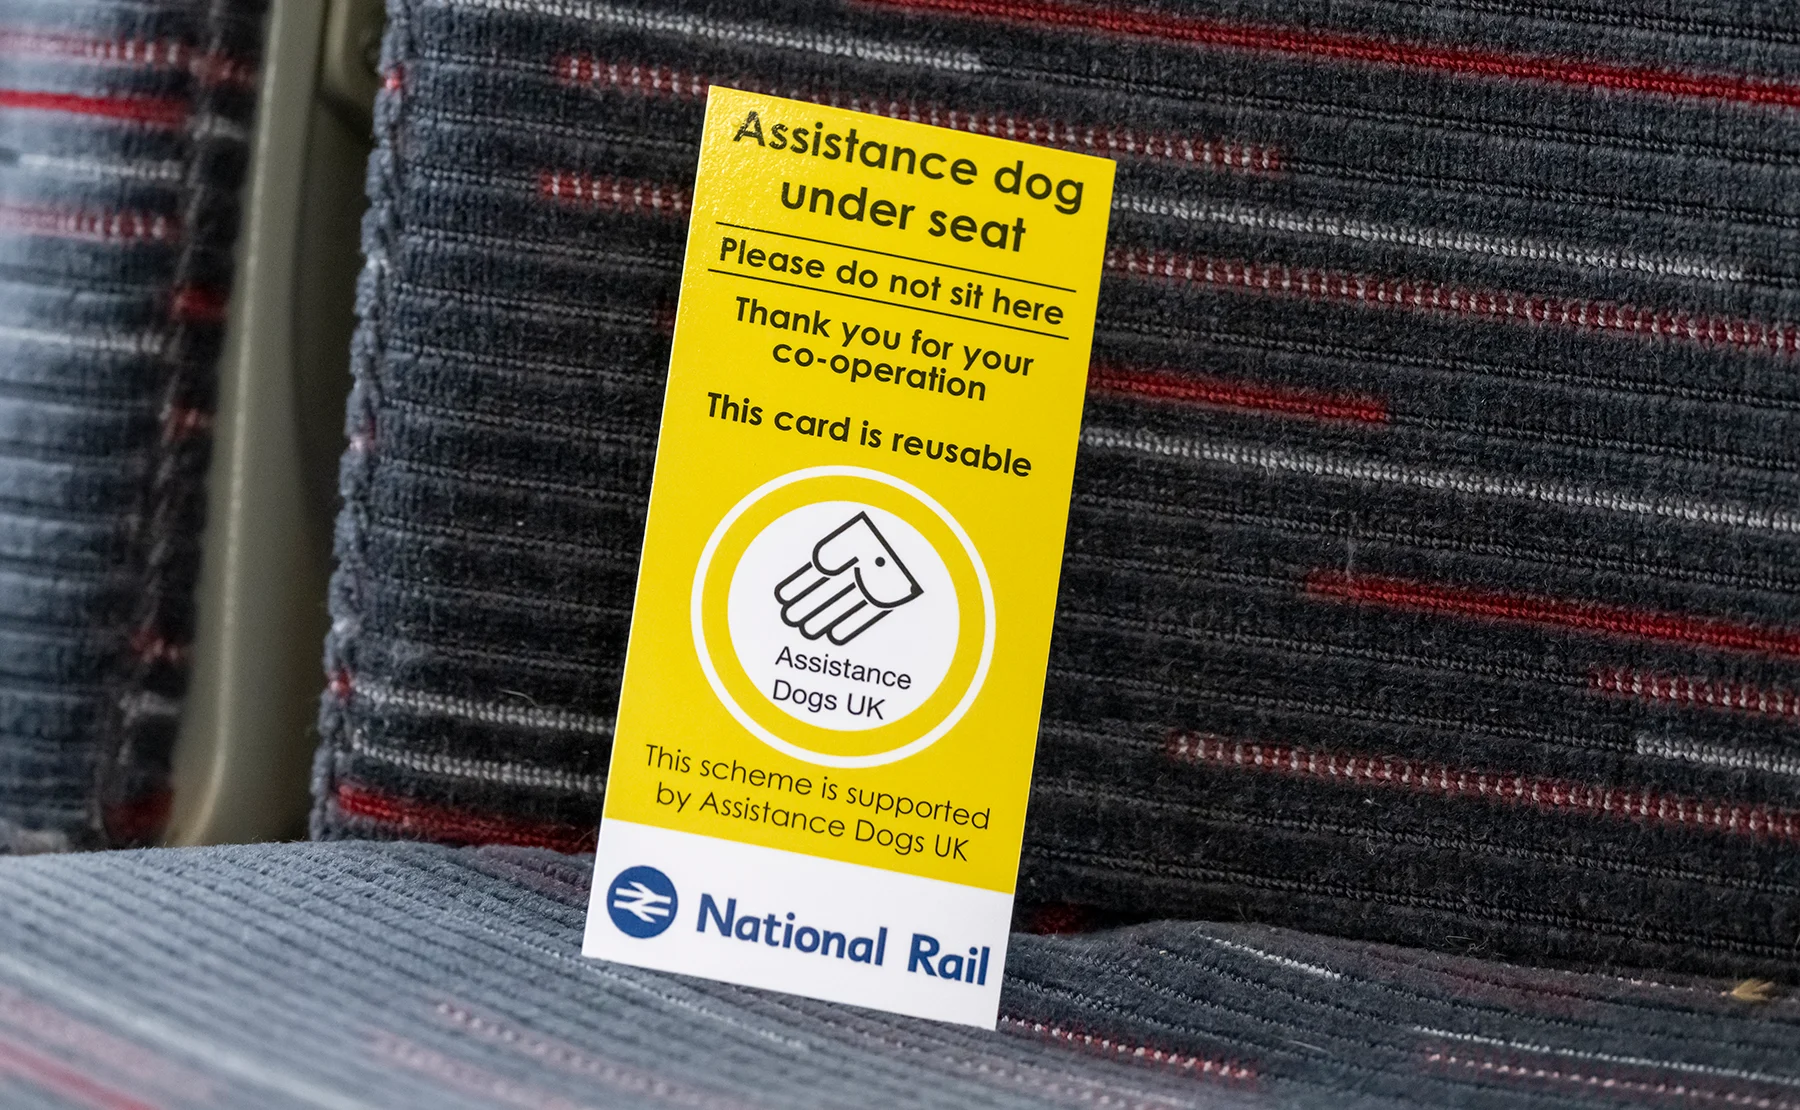 A yellow Assistance dog under seat card placed on a train seat.